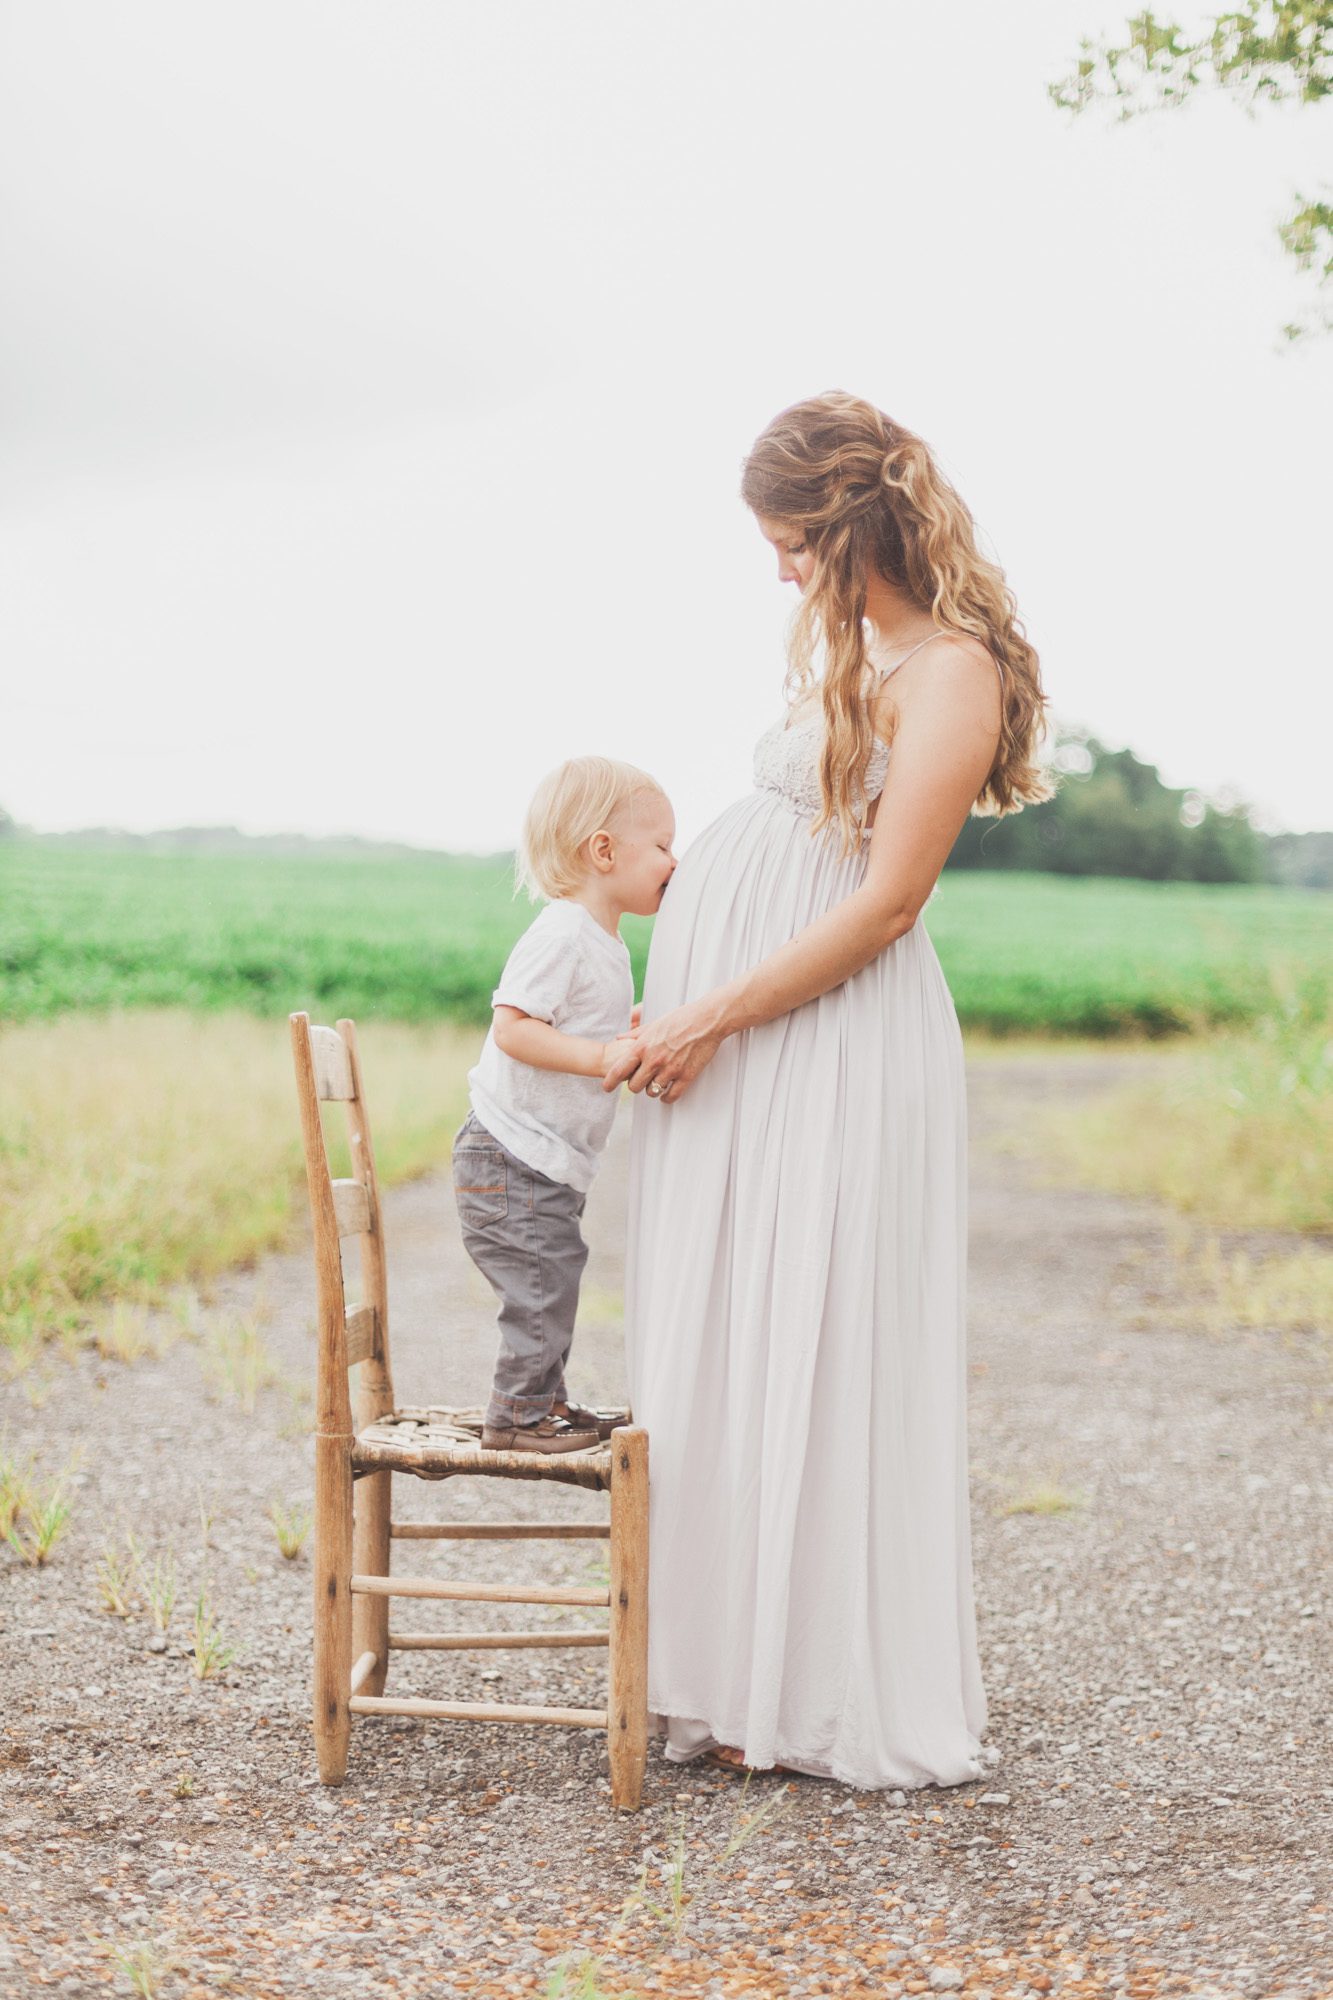 Maternity photos with family at farm, mom with son kissing bump